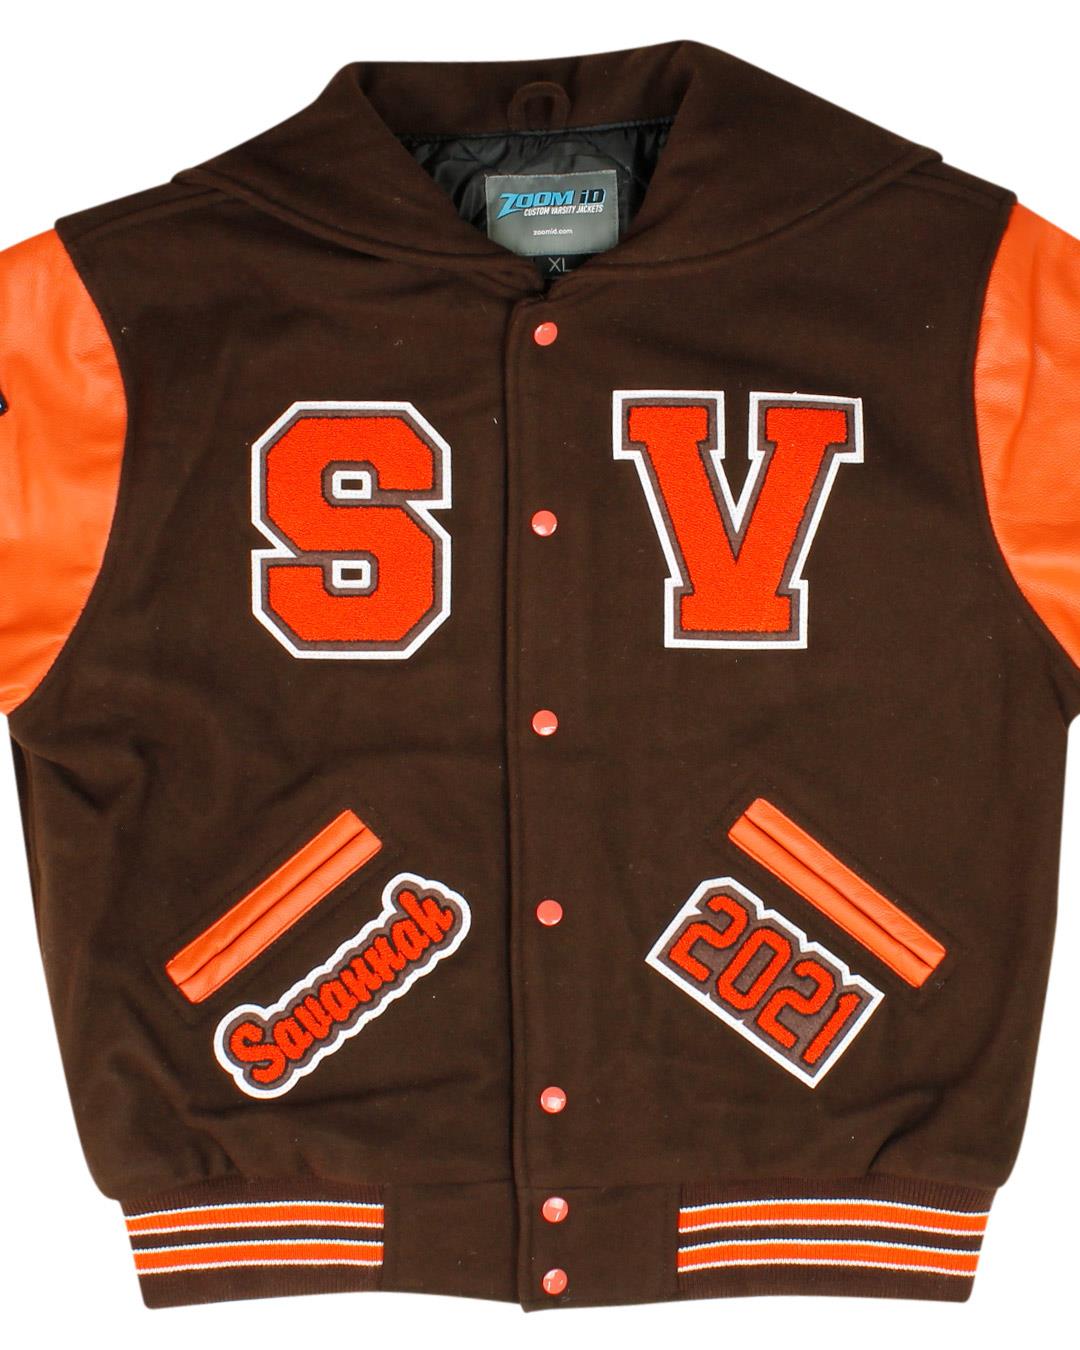 Southview High School Letterman Jacket, Sylvania OH - Front